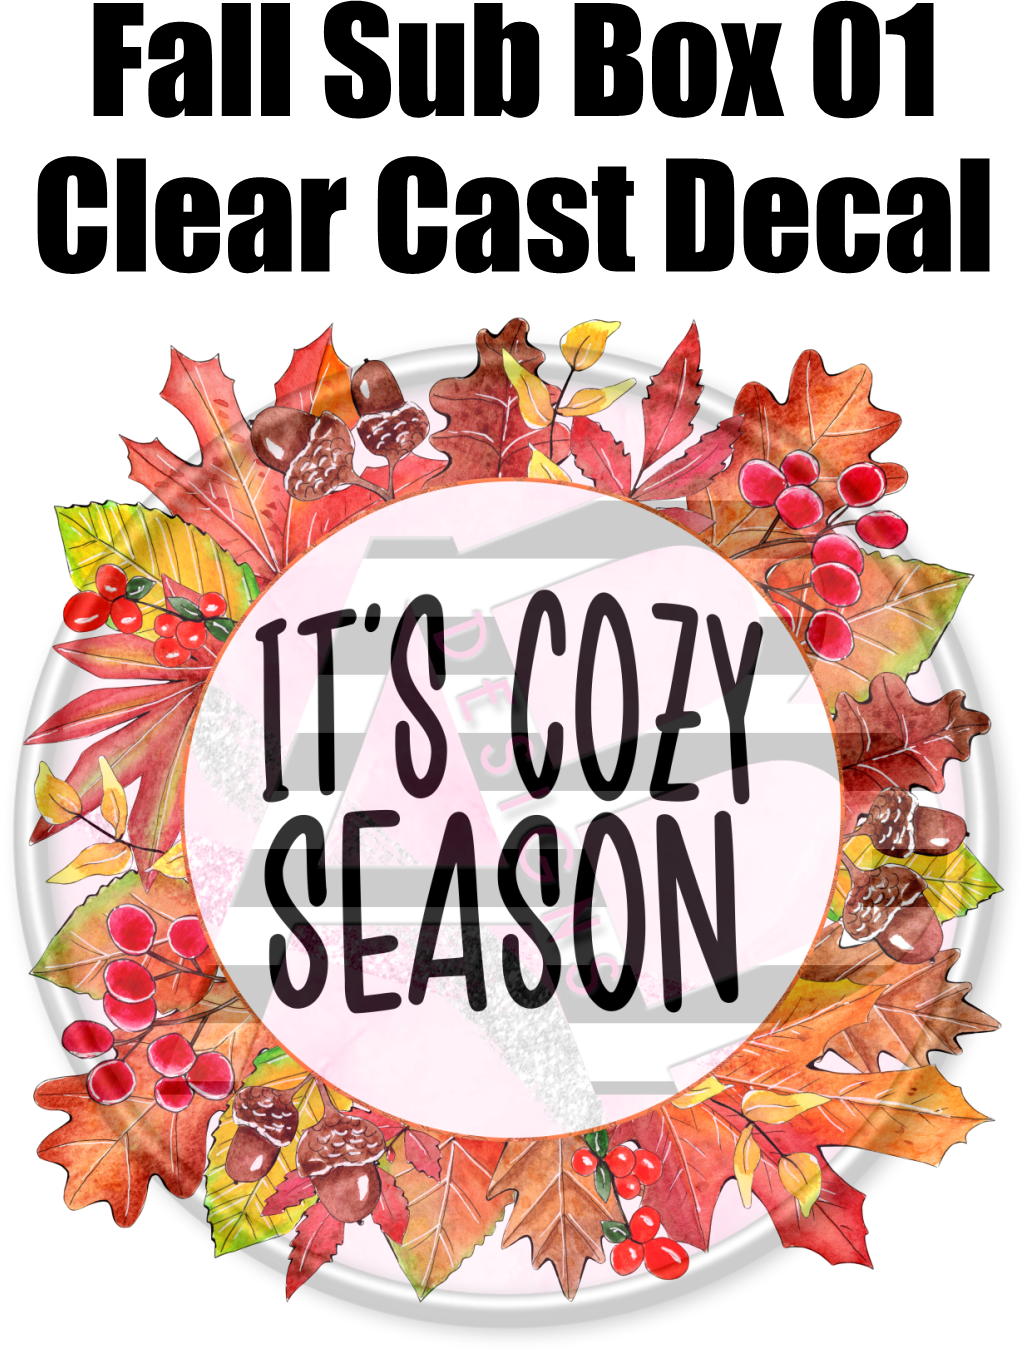 Fall Sub Box Decal 01 - Clear Cast Decal